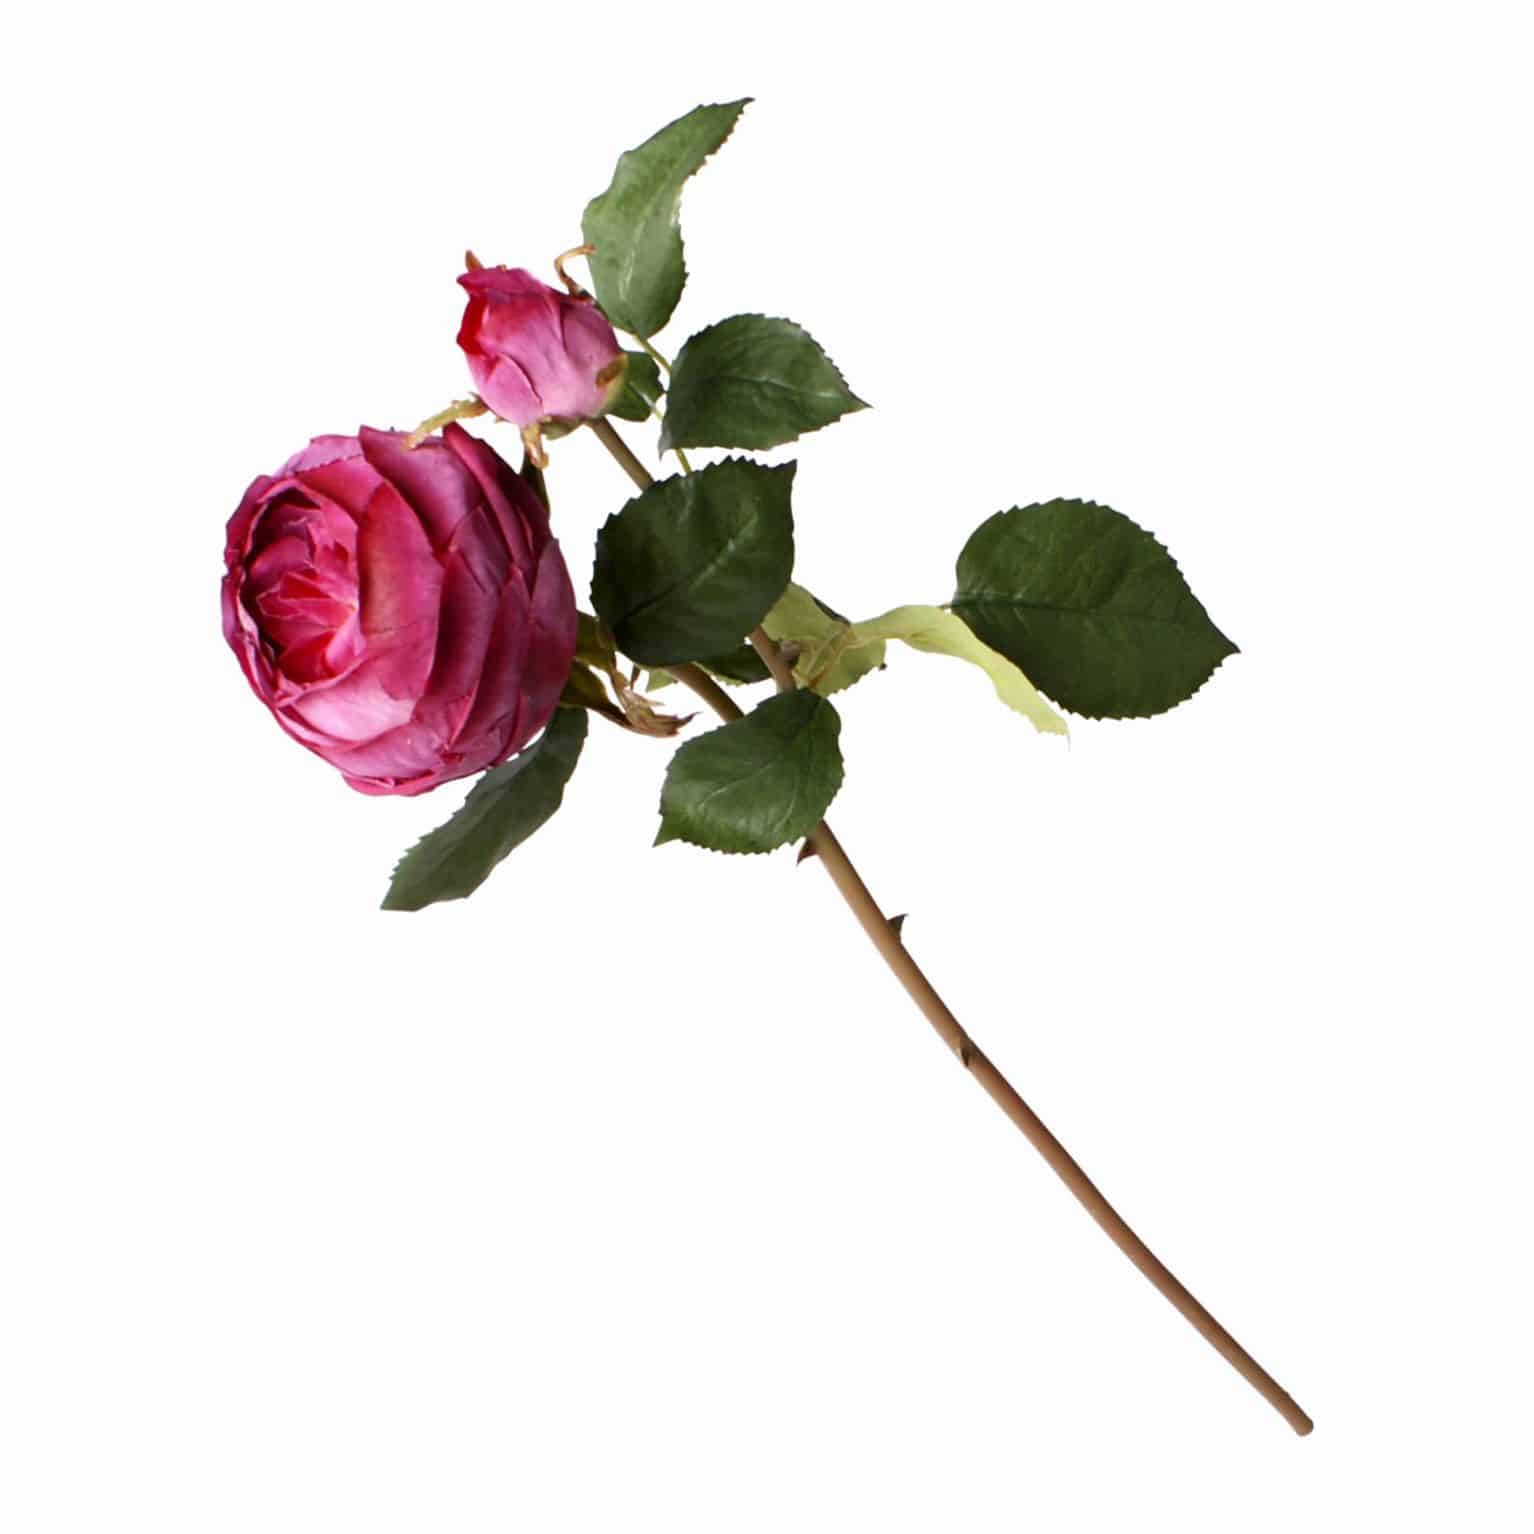 Buy our best fully bloomed rose silk flowers. Rich wine red colour of densely layered petals including a budding flower. Perfect for tall arrangements.